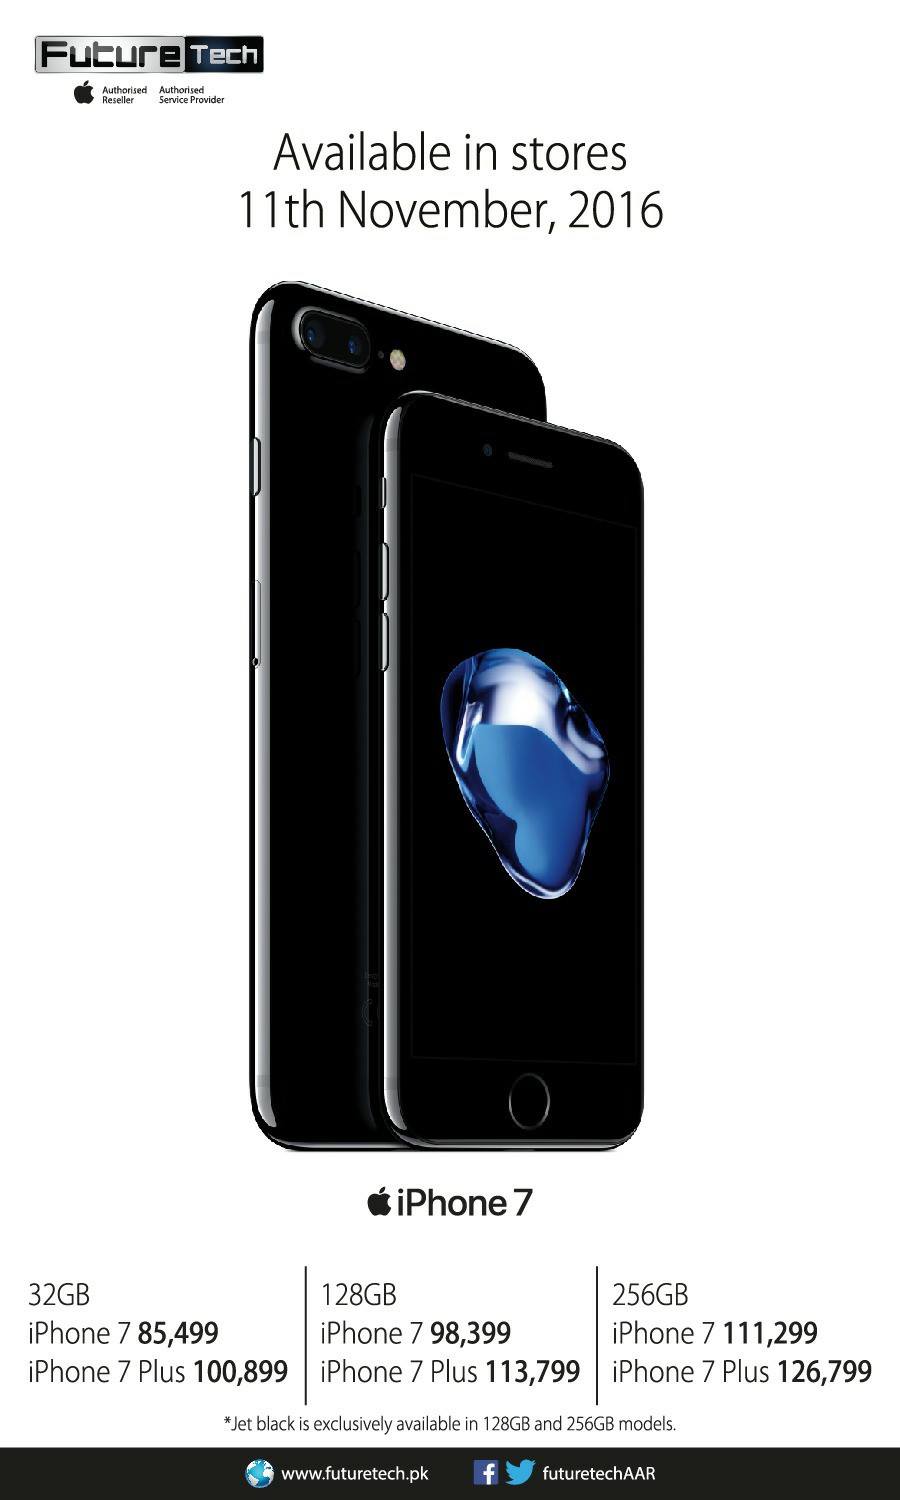 Future Techbrings  the iPhone 7 in Pakistan on 11th November 2016